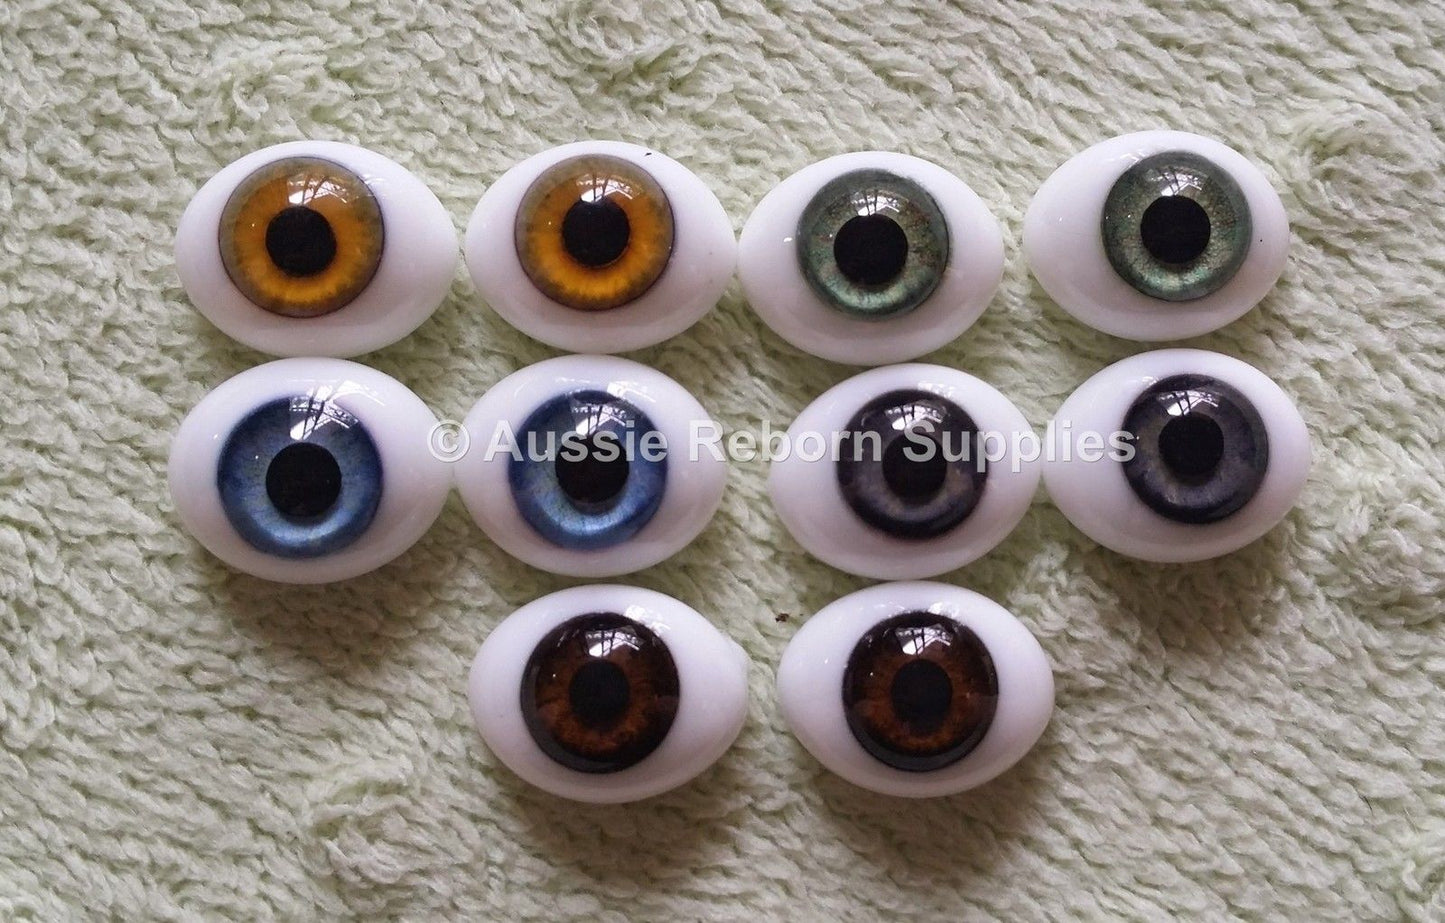 14mm Brown Oval Glass Eyes Reborn Baby Doll Making Supplies